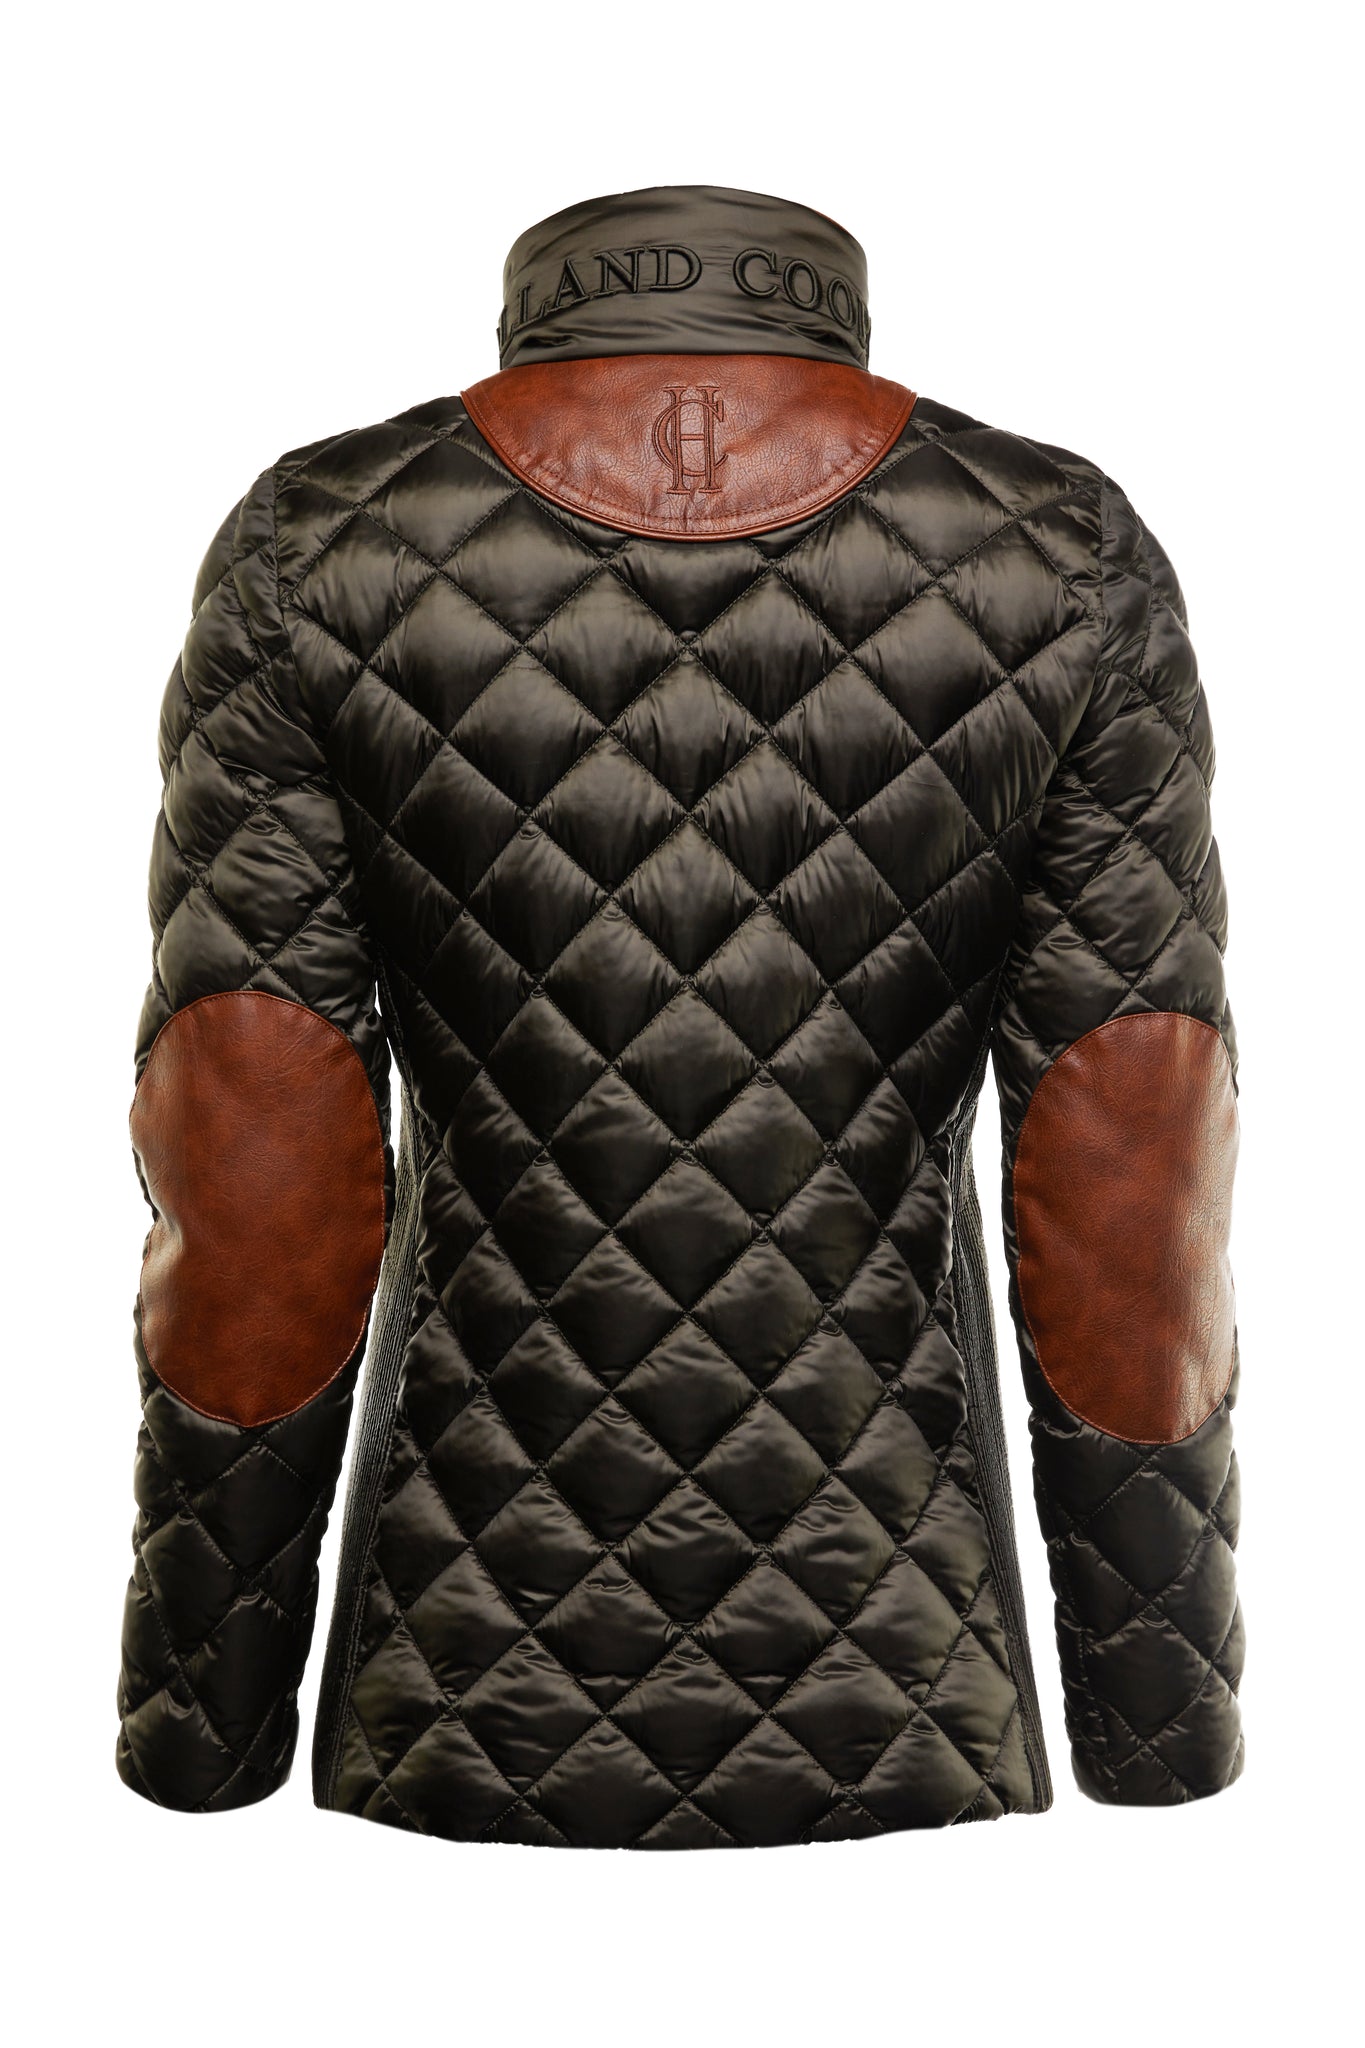 back of womens diamond quilted khaki jacket with contrast tan leather elbow and shoulder pads large front pockets and shirred side panels